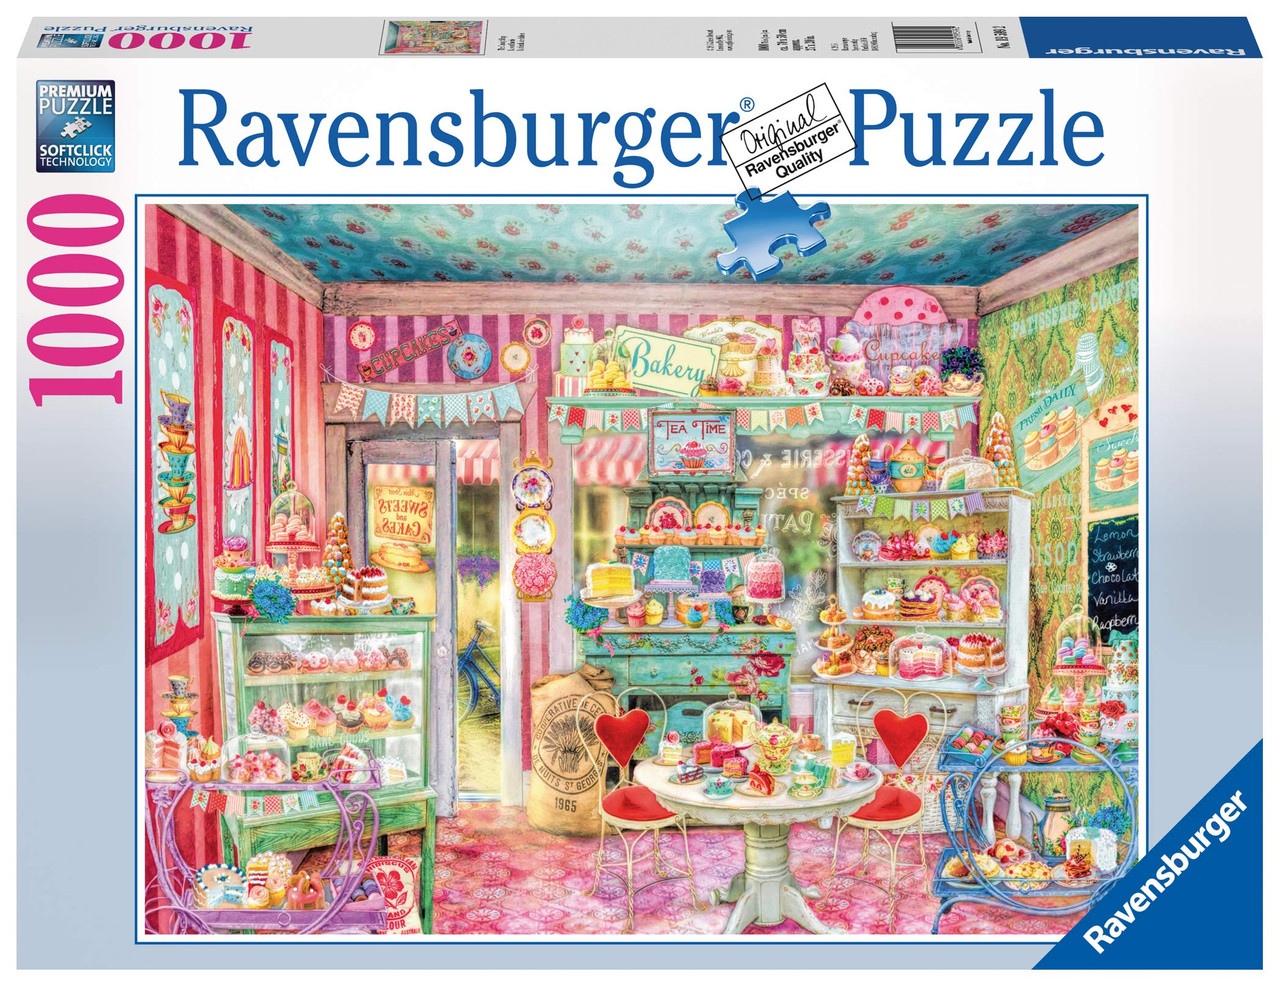  Ravensburger Doors of the World 1000 Piece Jigsaw Puzzle for  Adults – Every piece is unique, Softclick technology Means Pieces Fit  Together Perfectly : Everything Else